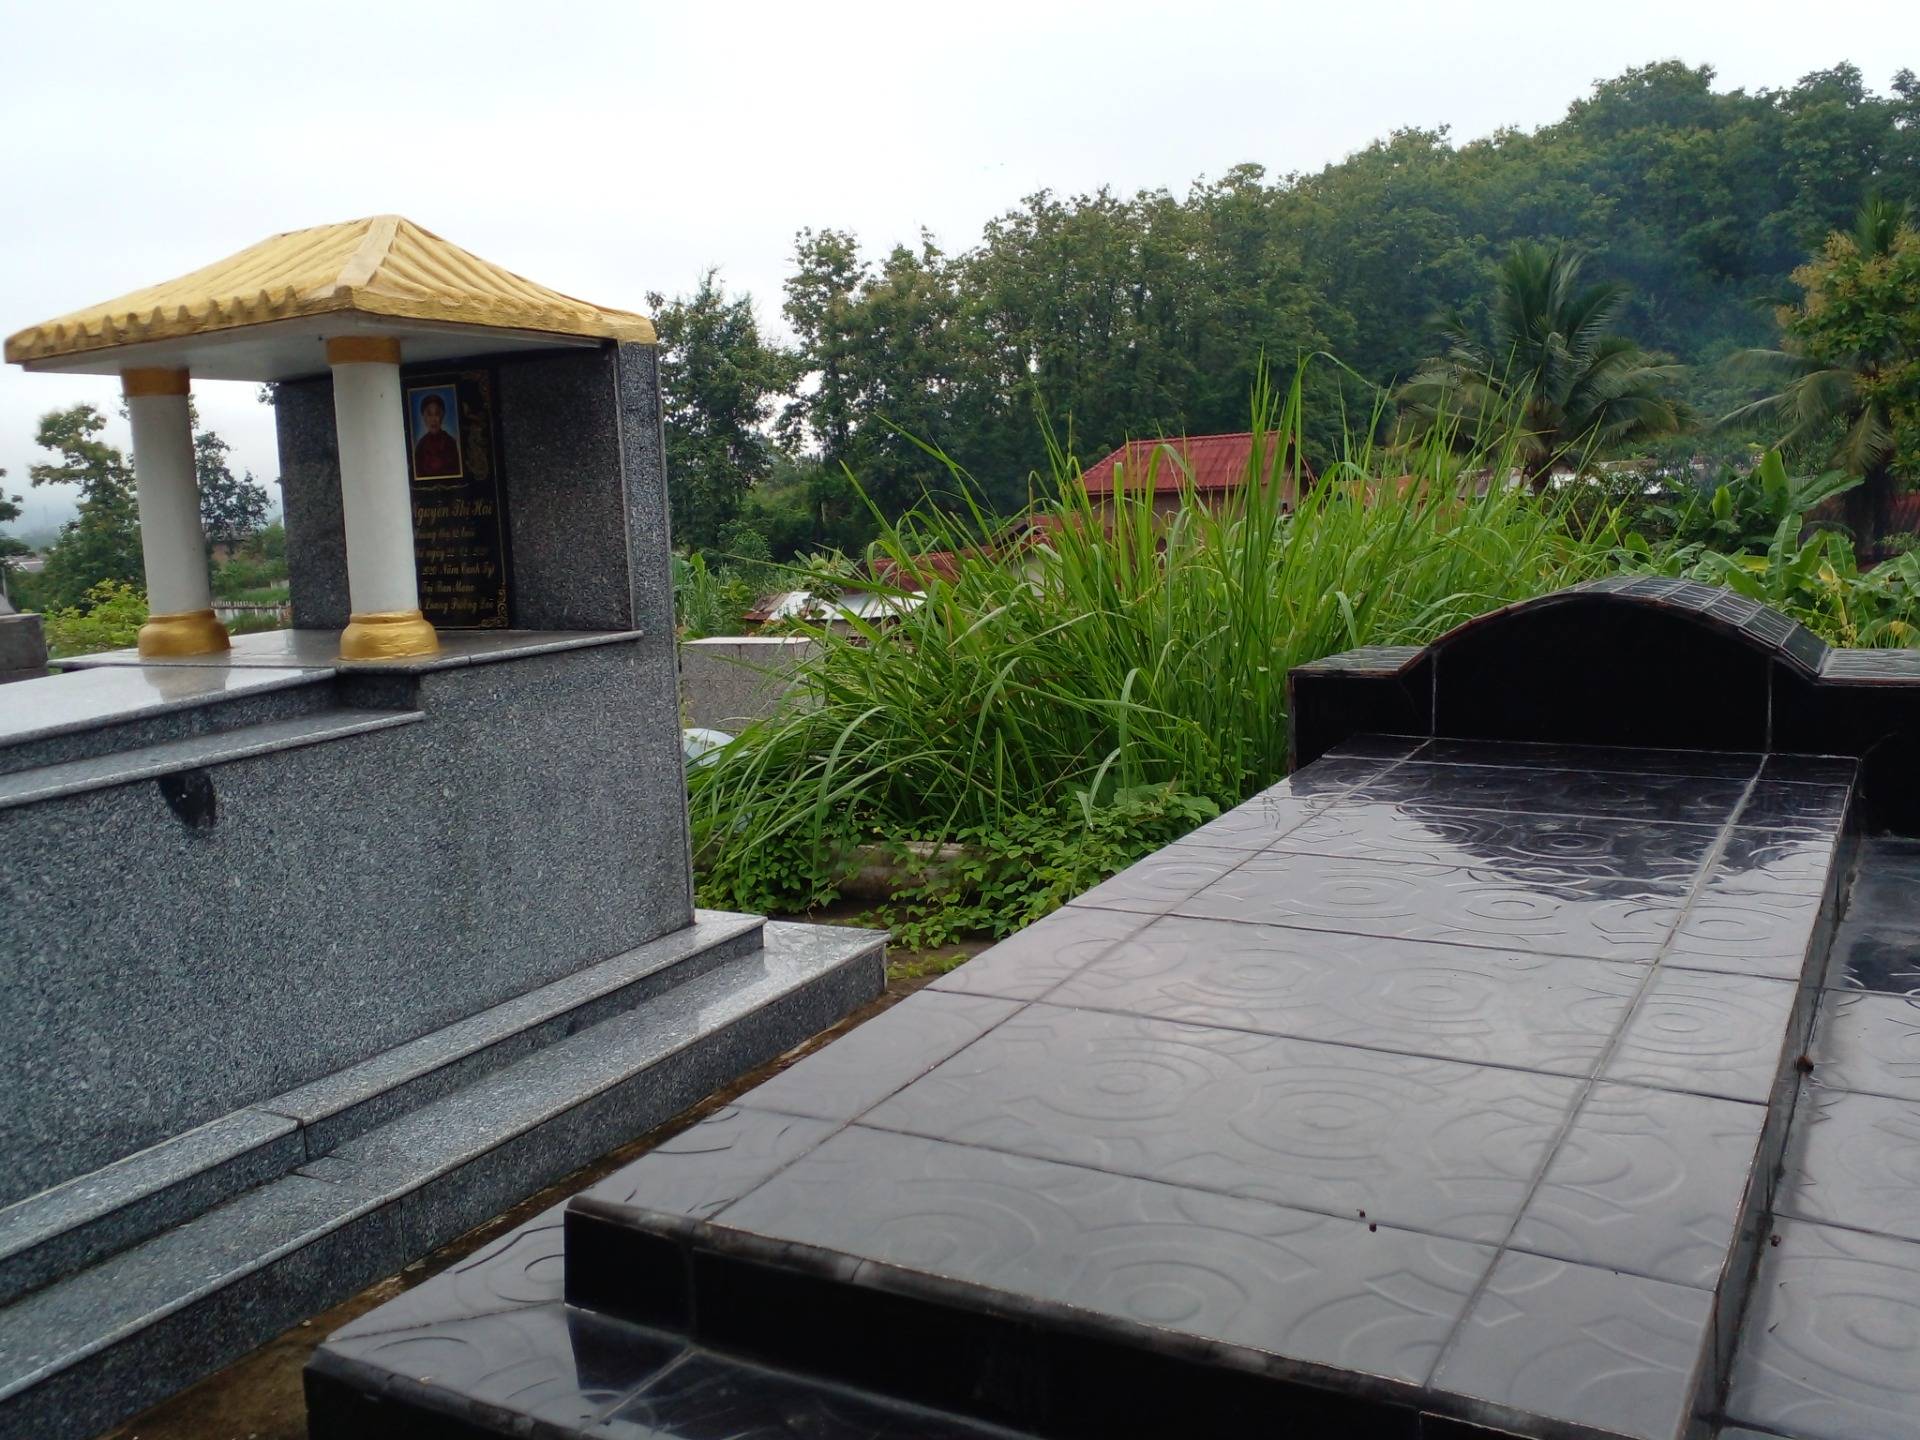 Rainy walk to a Chinese Cemetery